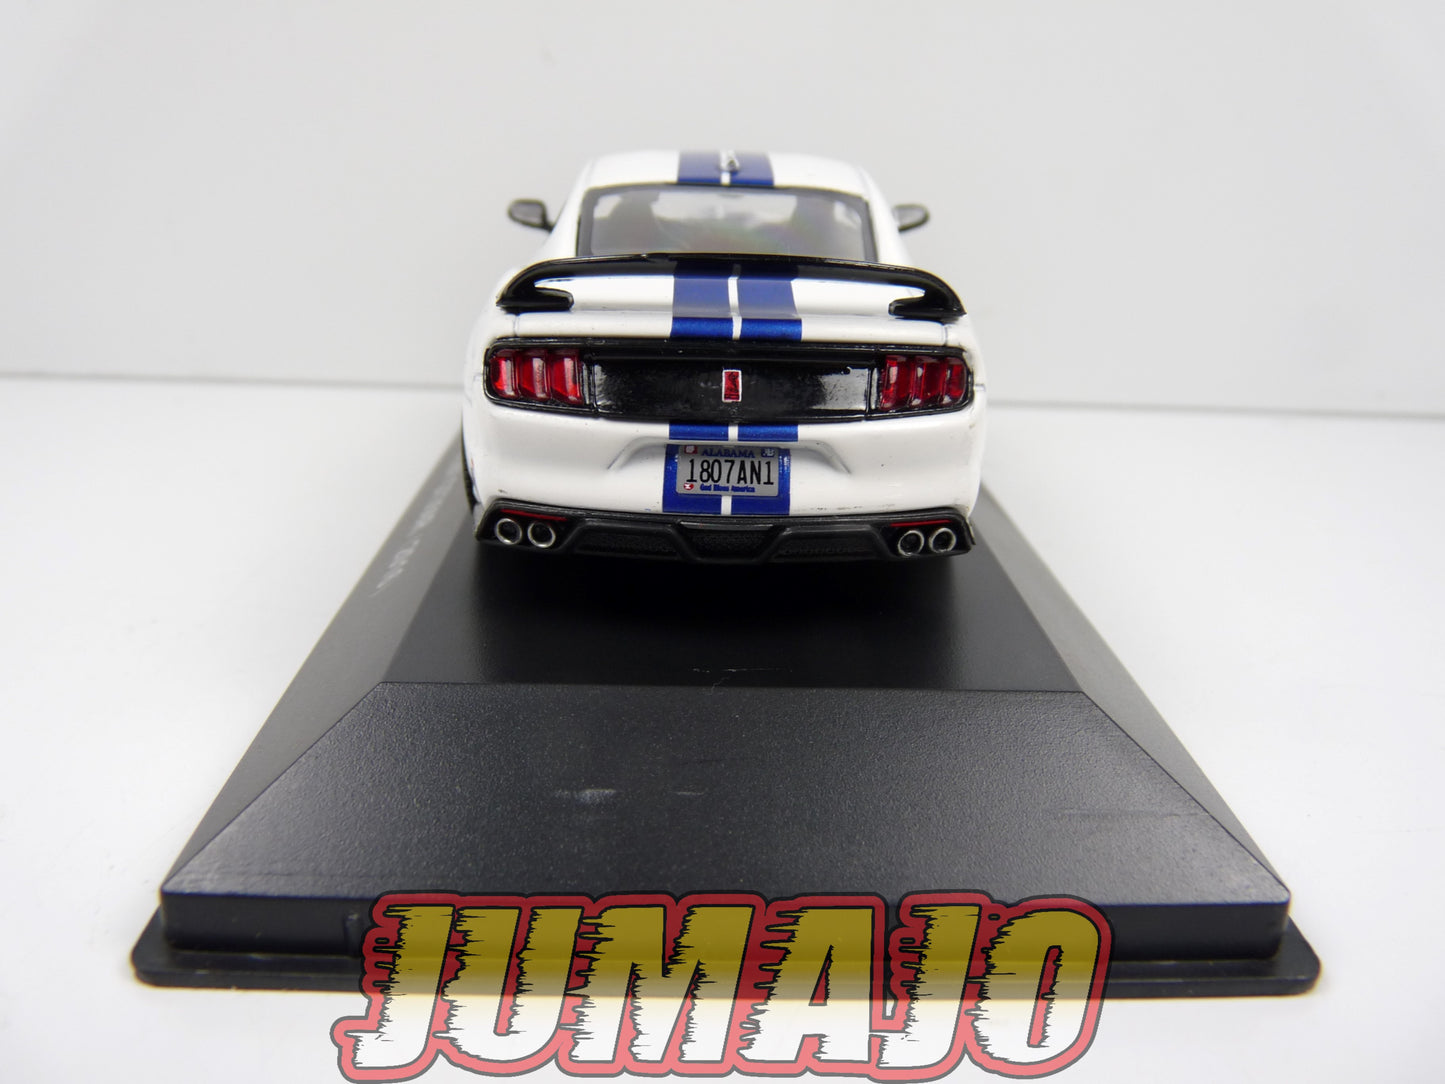 DIV39 voiture 1/43 IXO altaya Collections Mustang Ford Mustang Shelby GT350R 2016